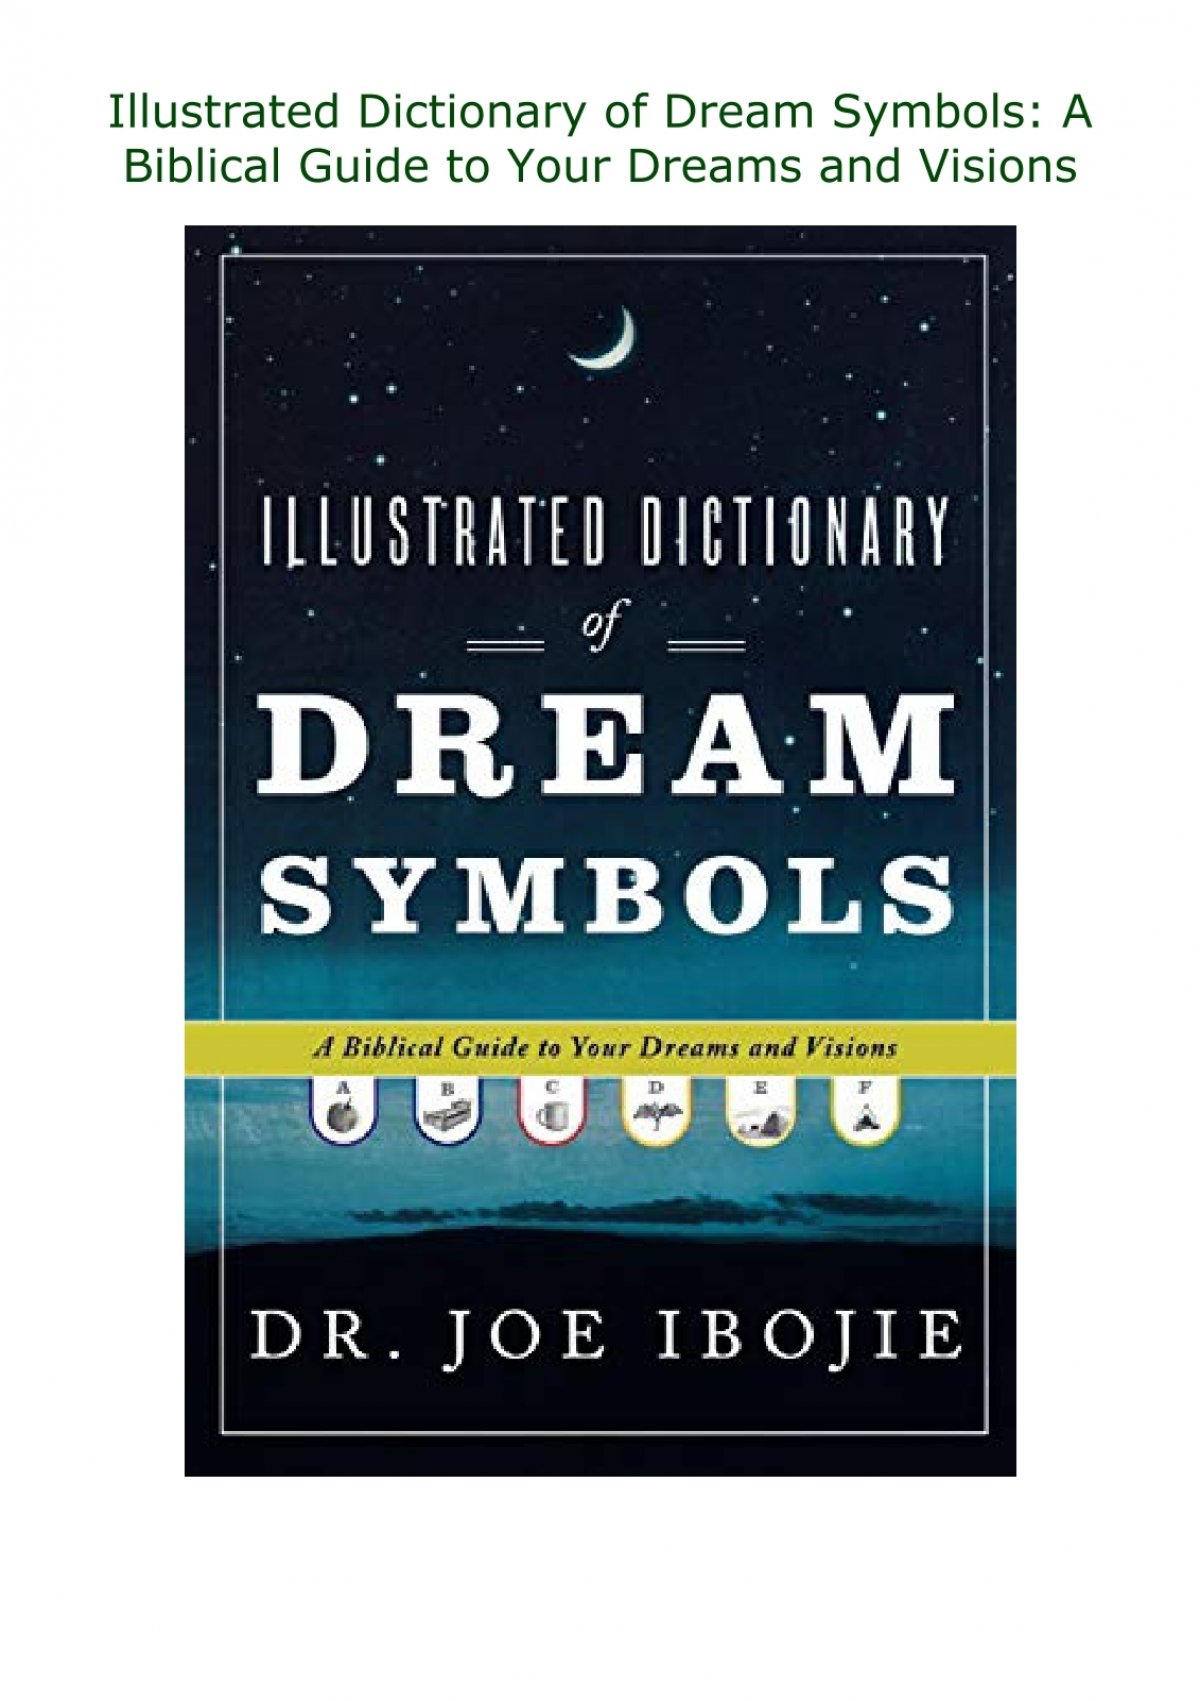 illustrated dictionary of dream symbols pdf free download